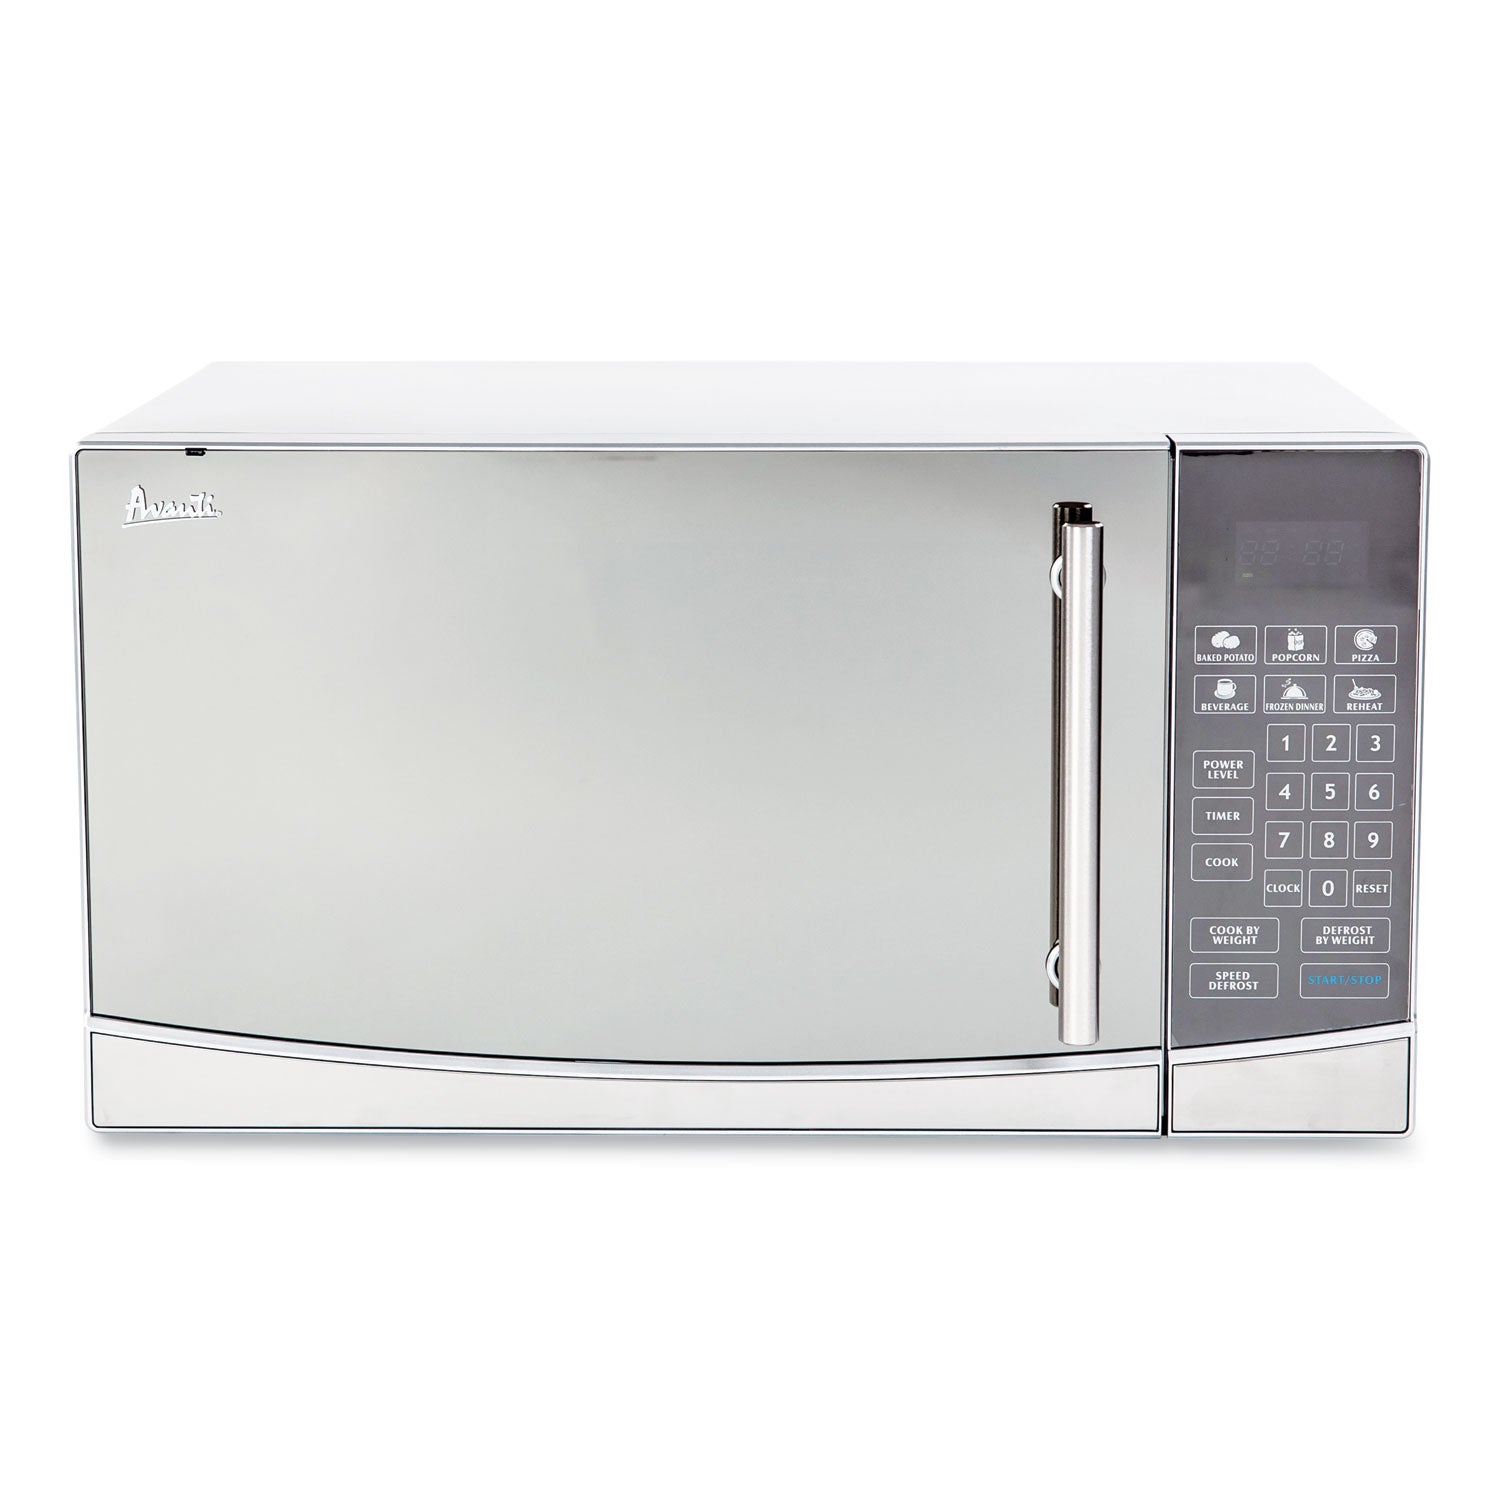 1.1 Cubic Foot Capacity Stainless Steel Touch Microwave Oven, 1,000 Watts - 